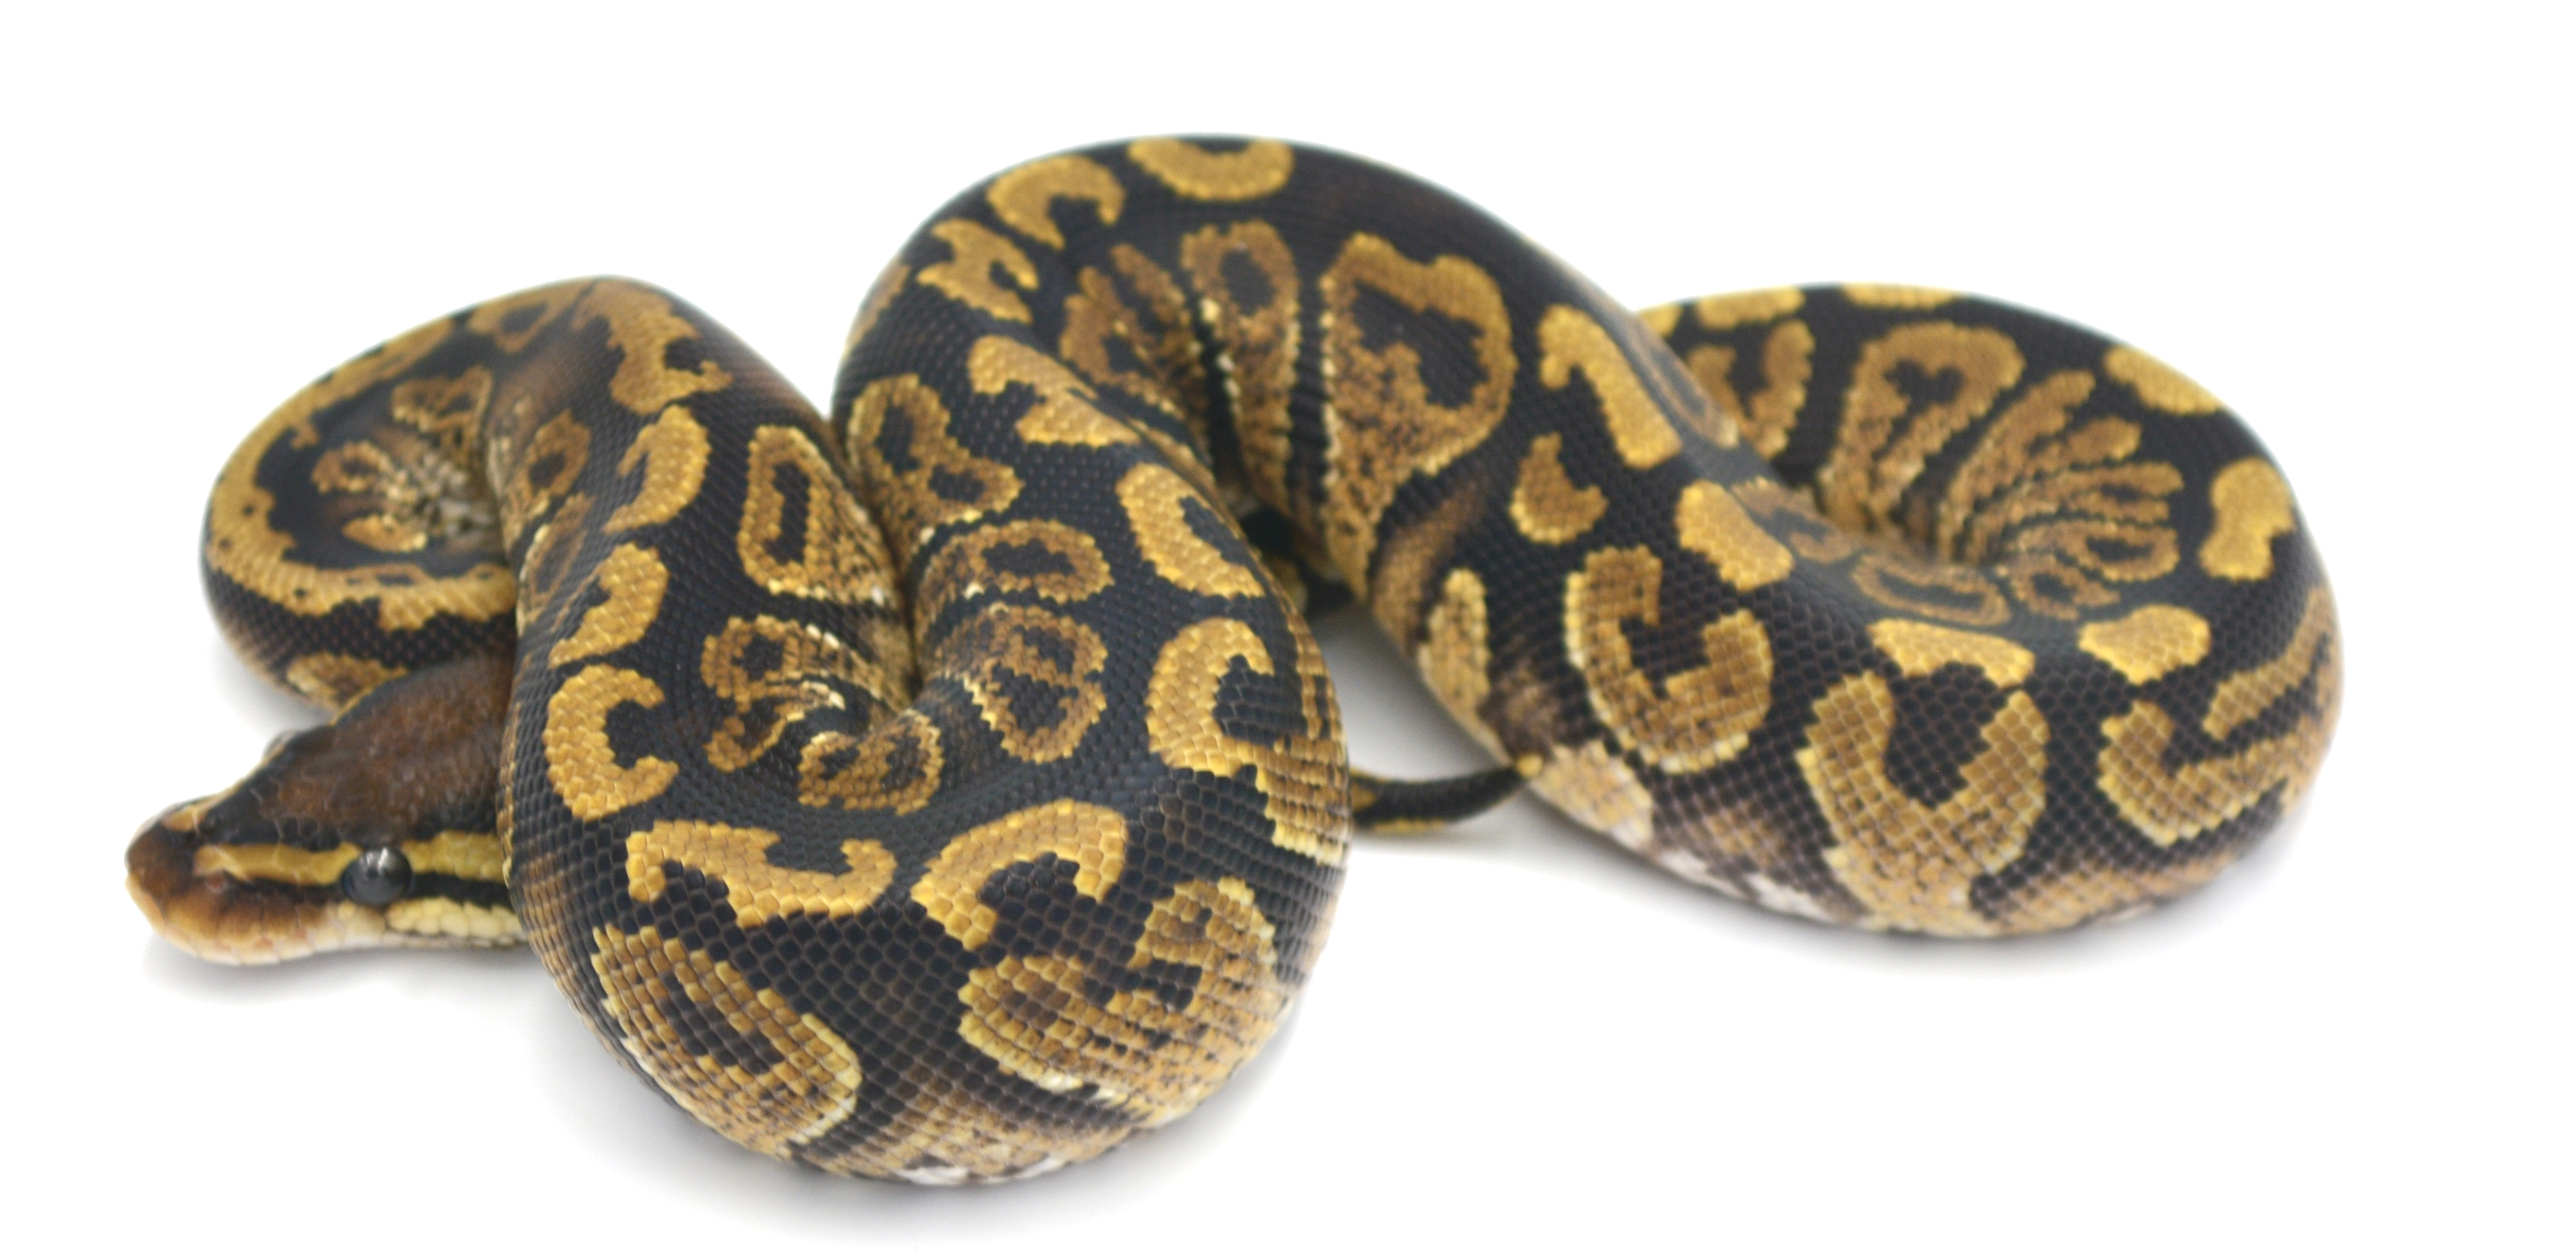 Paint Ball Python by Wreck Room Snakes